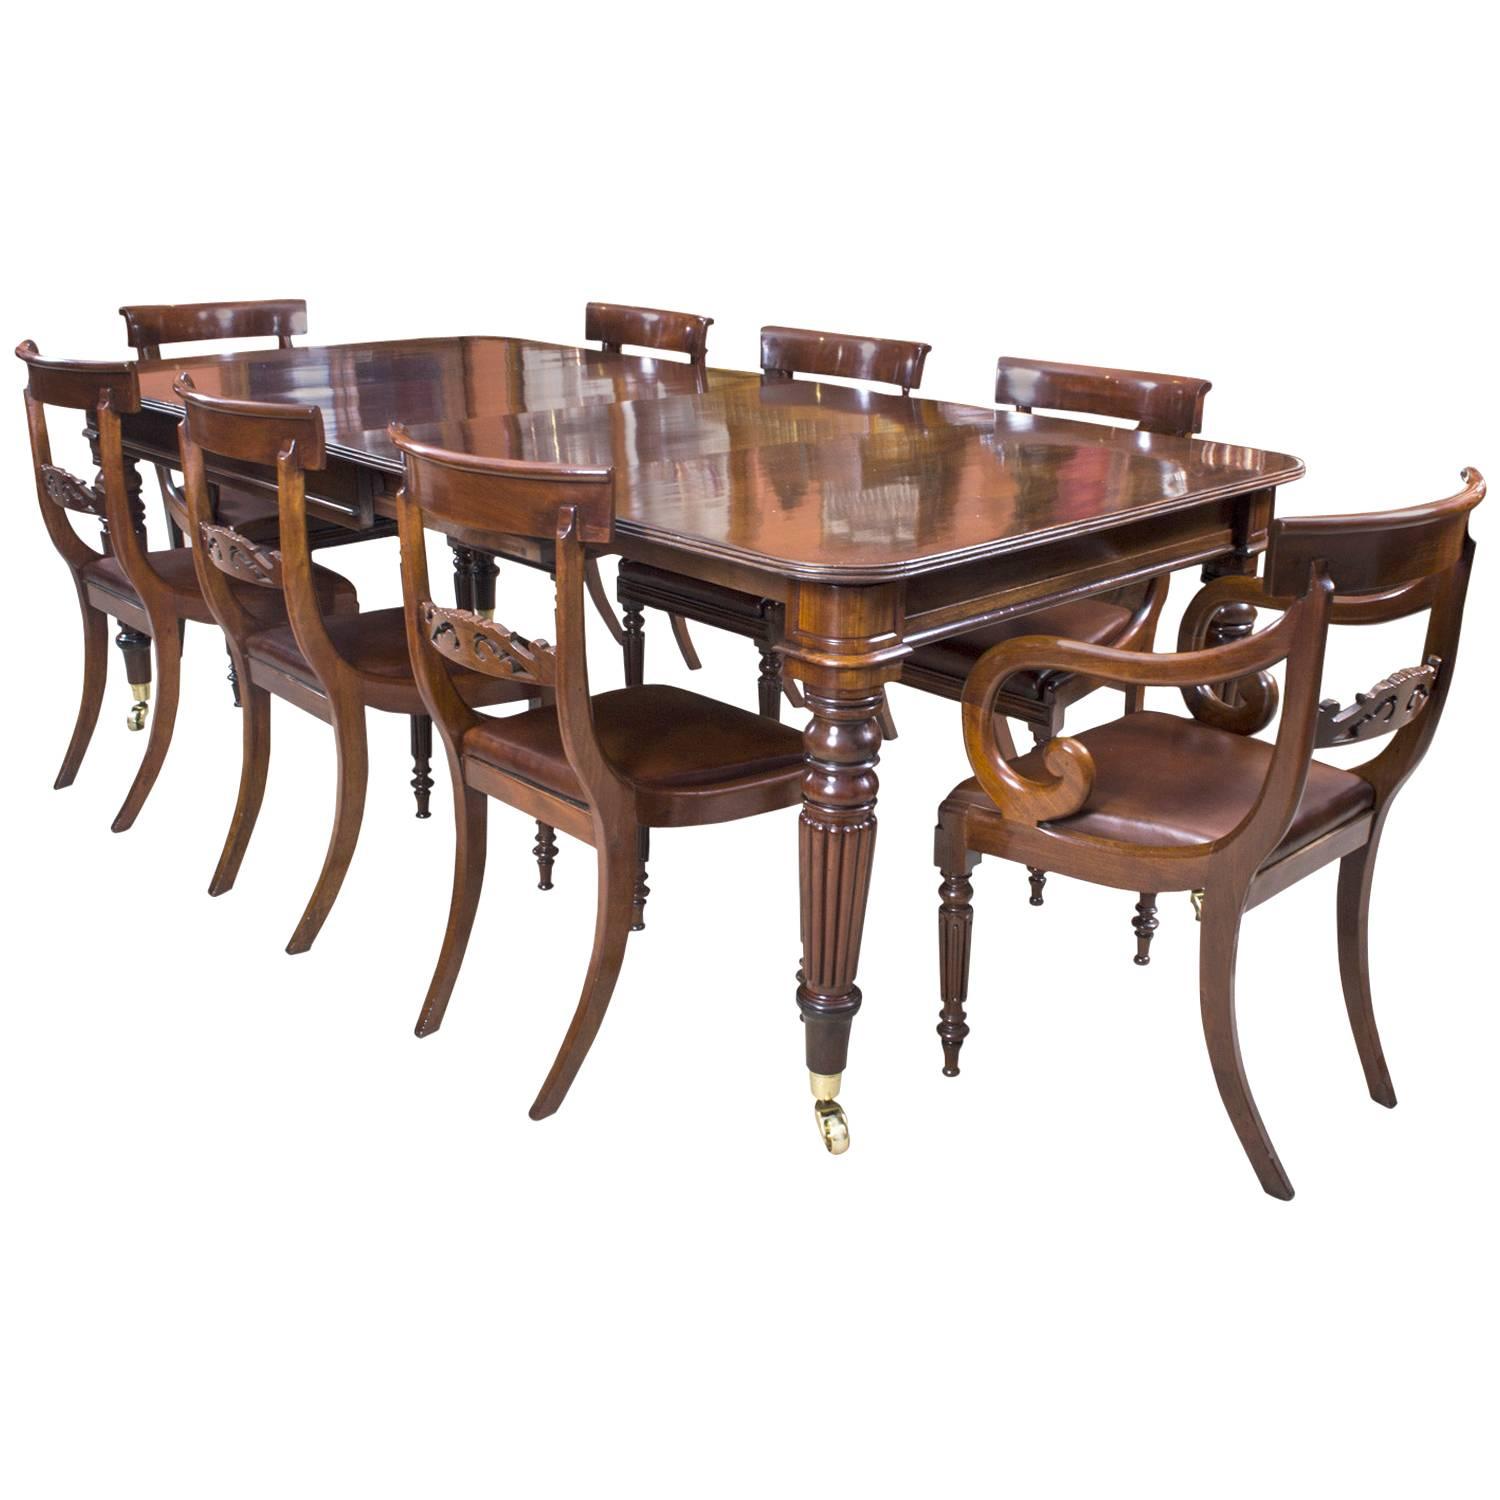 Antique Regency Mahogany Dining Table Eight Regency Chairs